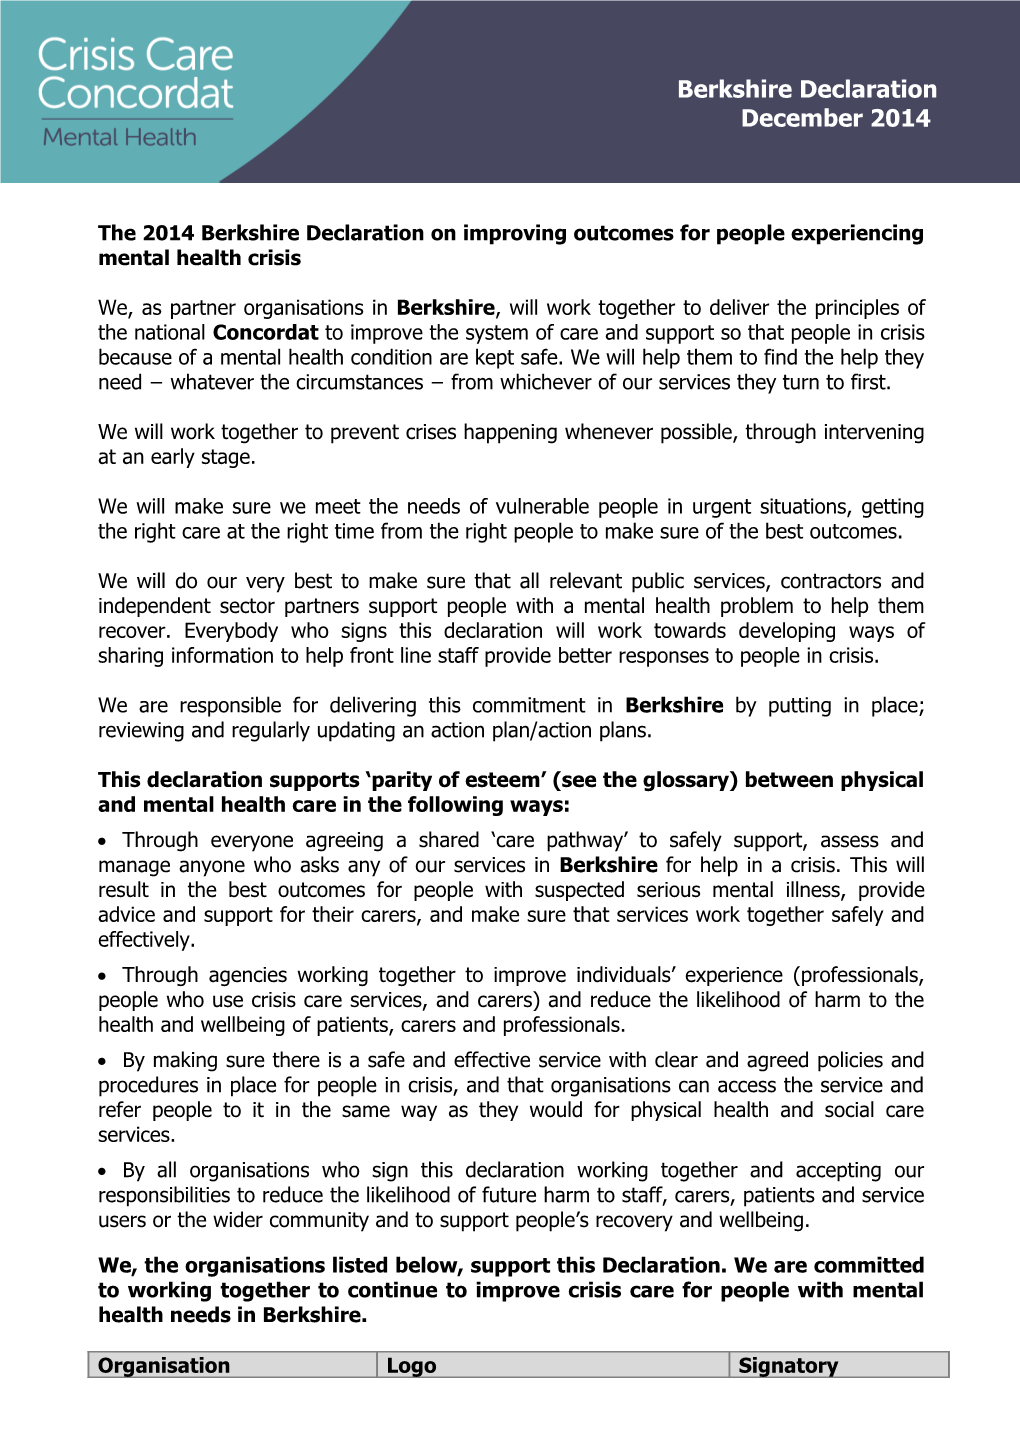 The 2014 Berkshire Declaration on Improving Outcomes for People Experiencing Mental Health